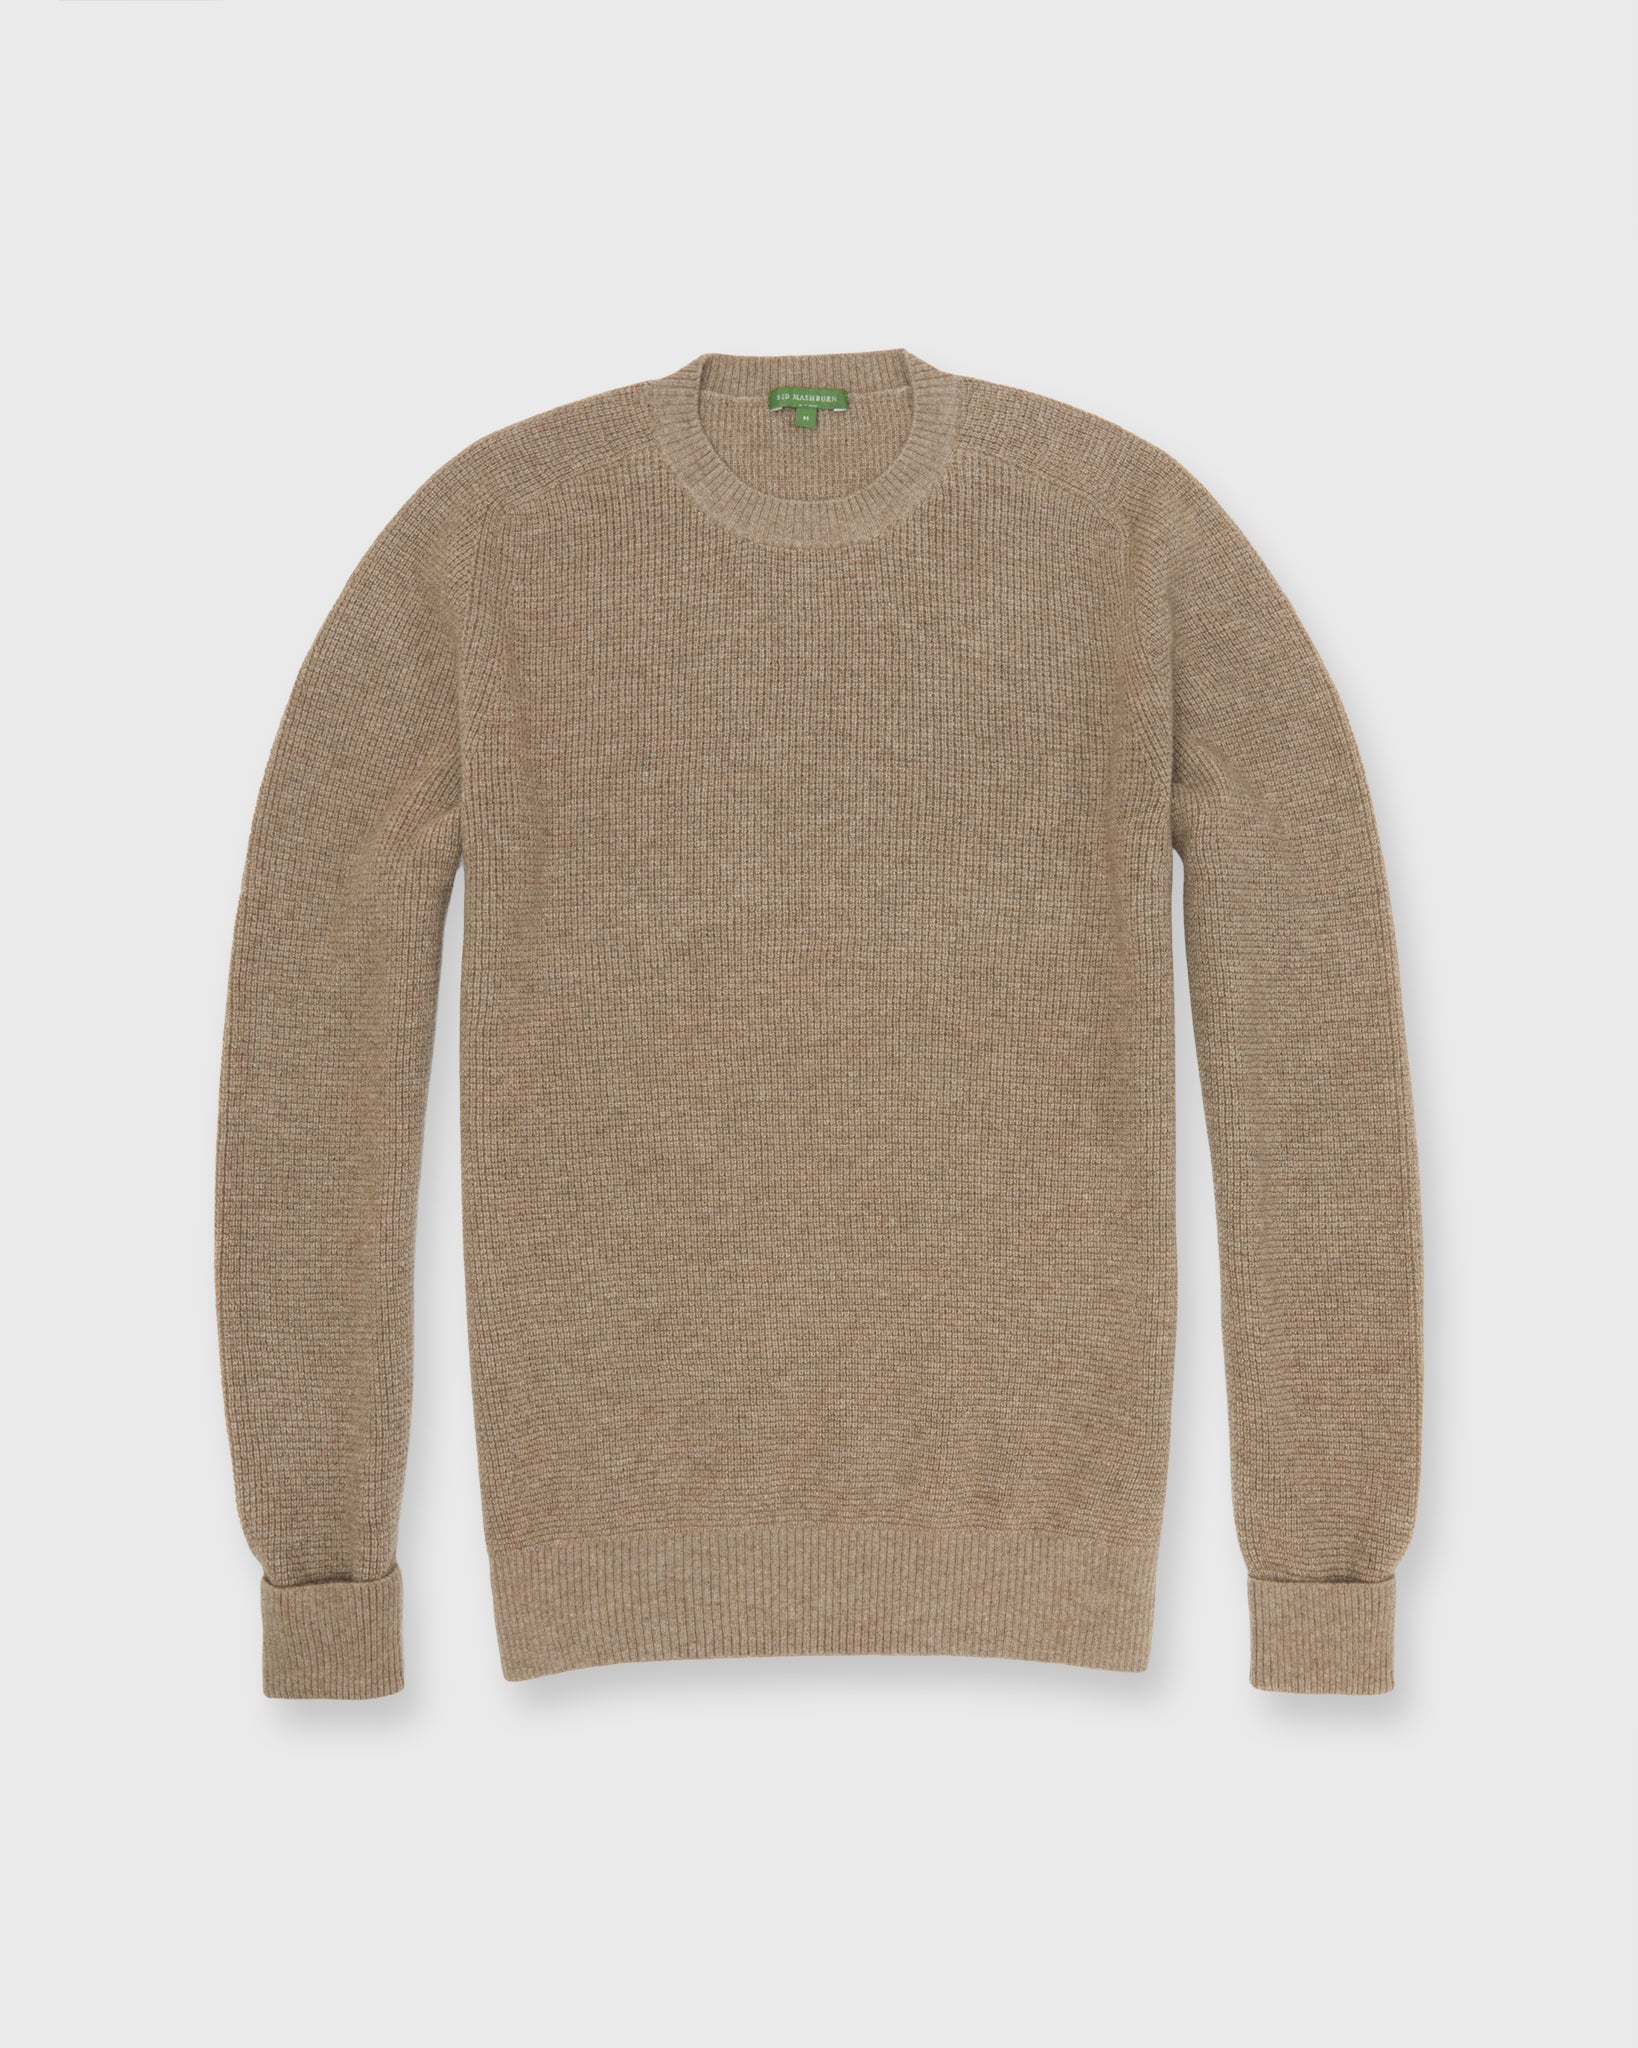 Thermal-Stitch Crewneck Sweater in Heather Taupe Cashmere